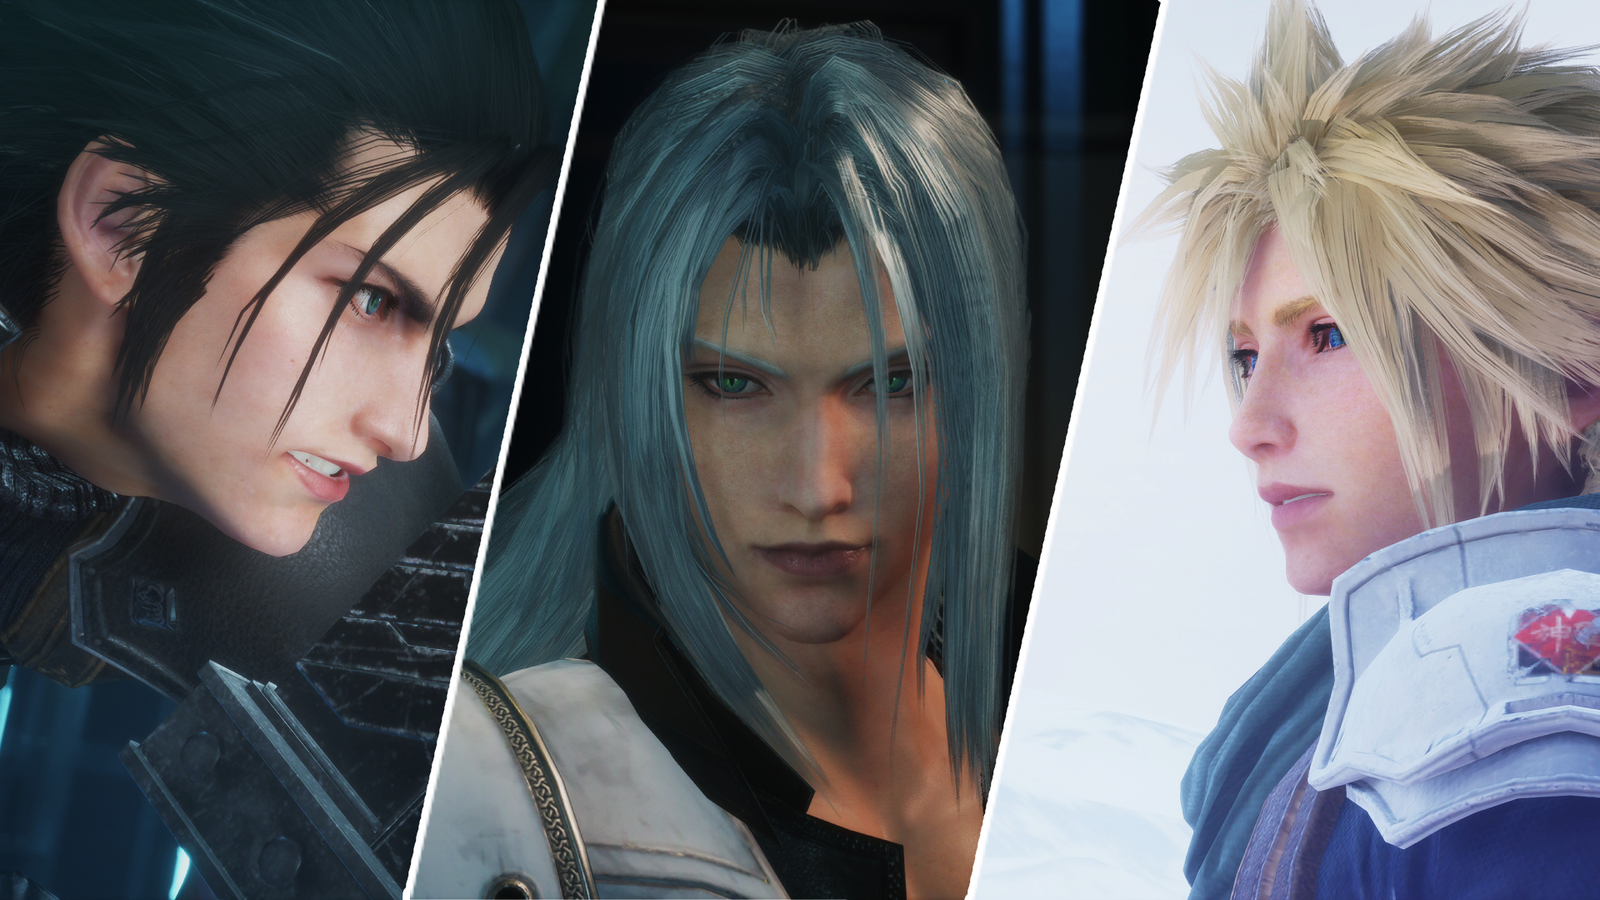 Final Fantasy 7 Rebirth preview: Part 2 of remake project cuts